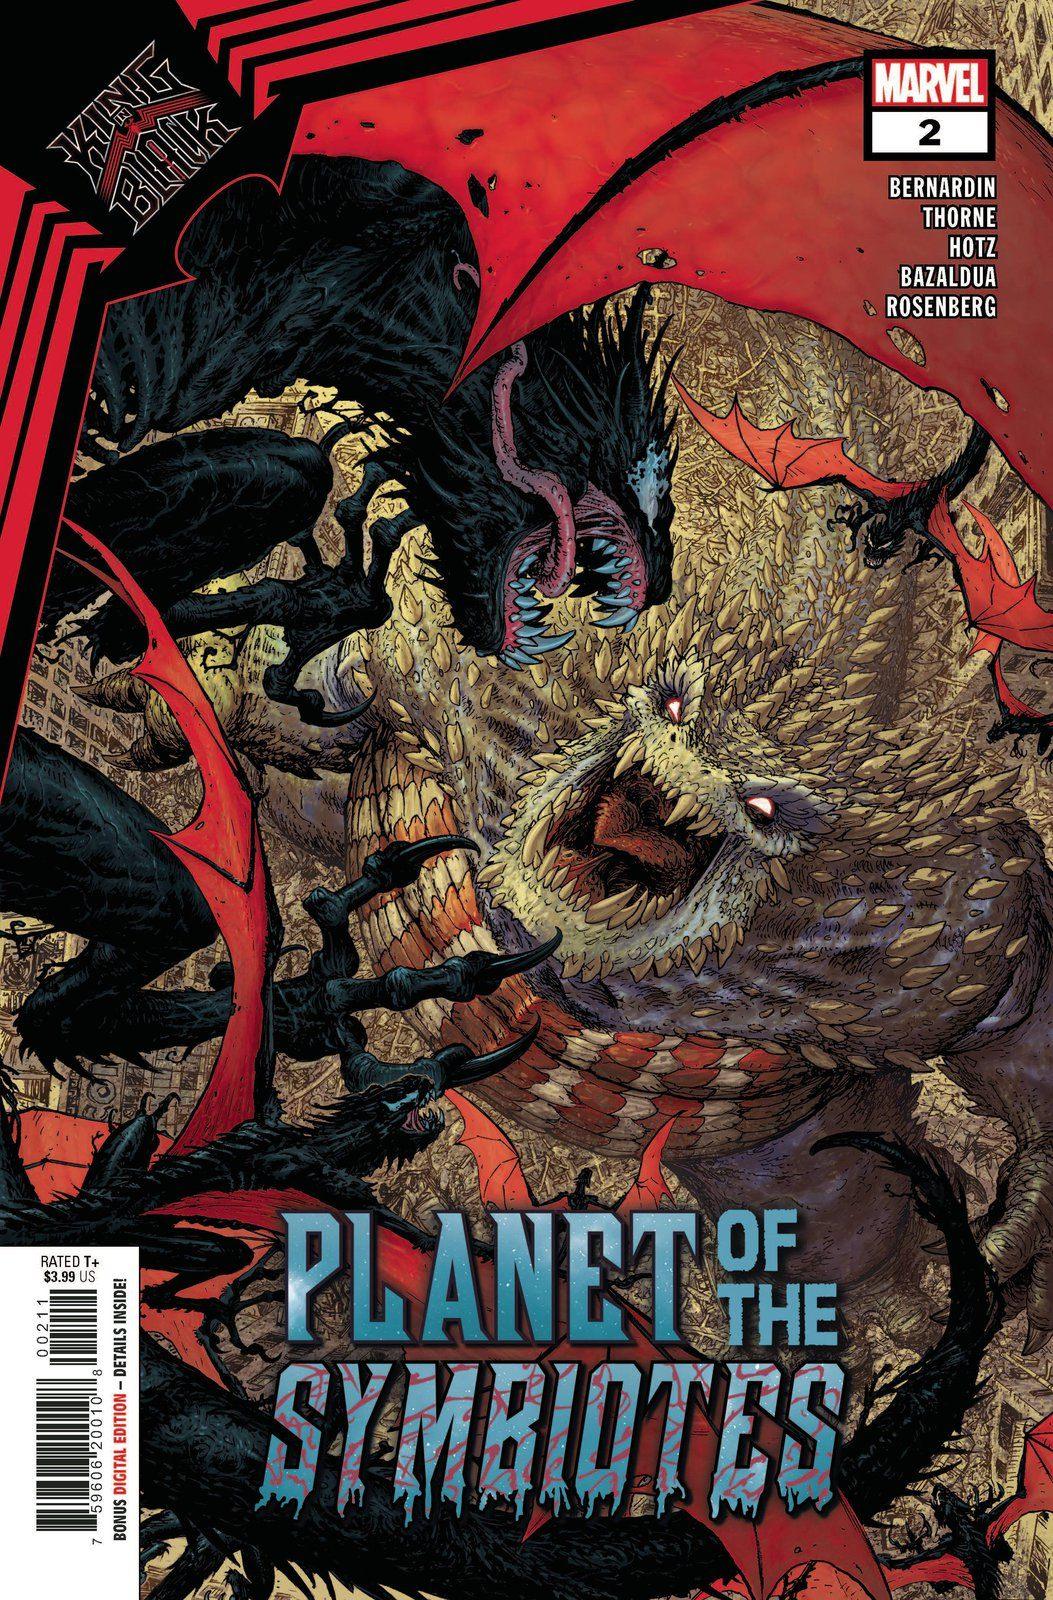 KING IN BLACK PLANET OF SYMBIOTES #2 (OF 3) (SHIPS 02-17-21) - PCKComics.com